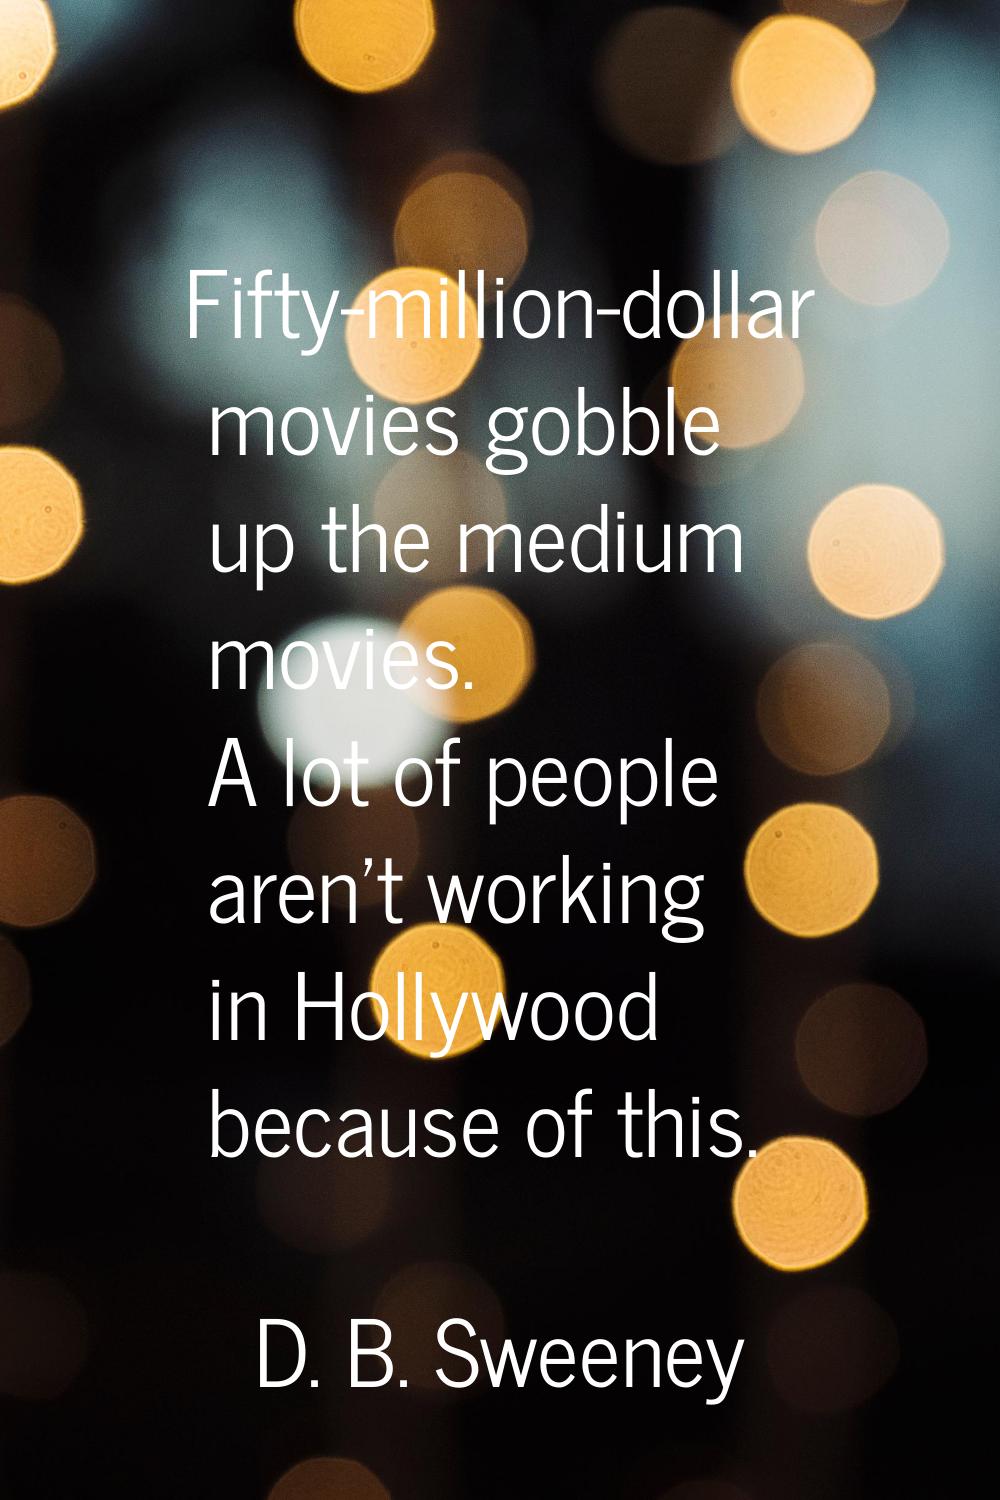 Fifty-million-dollar movies gobble up the medium movies. A lot of people aren't working in Hollywoo